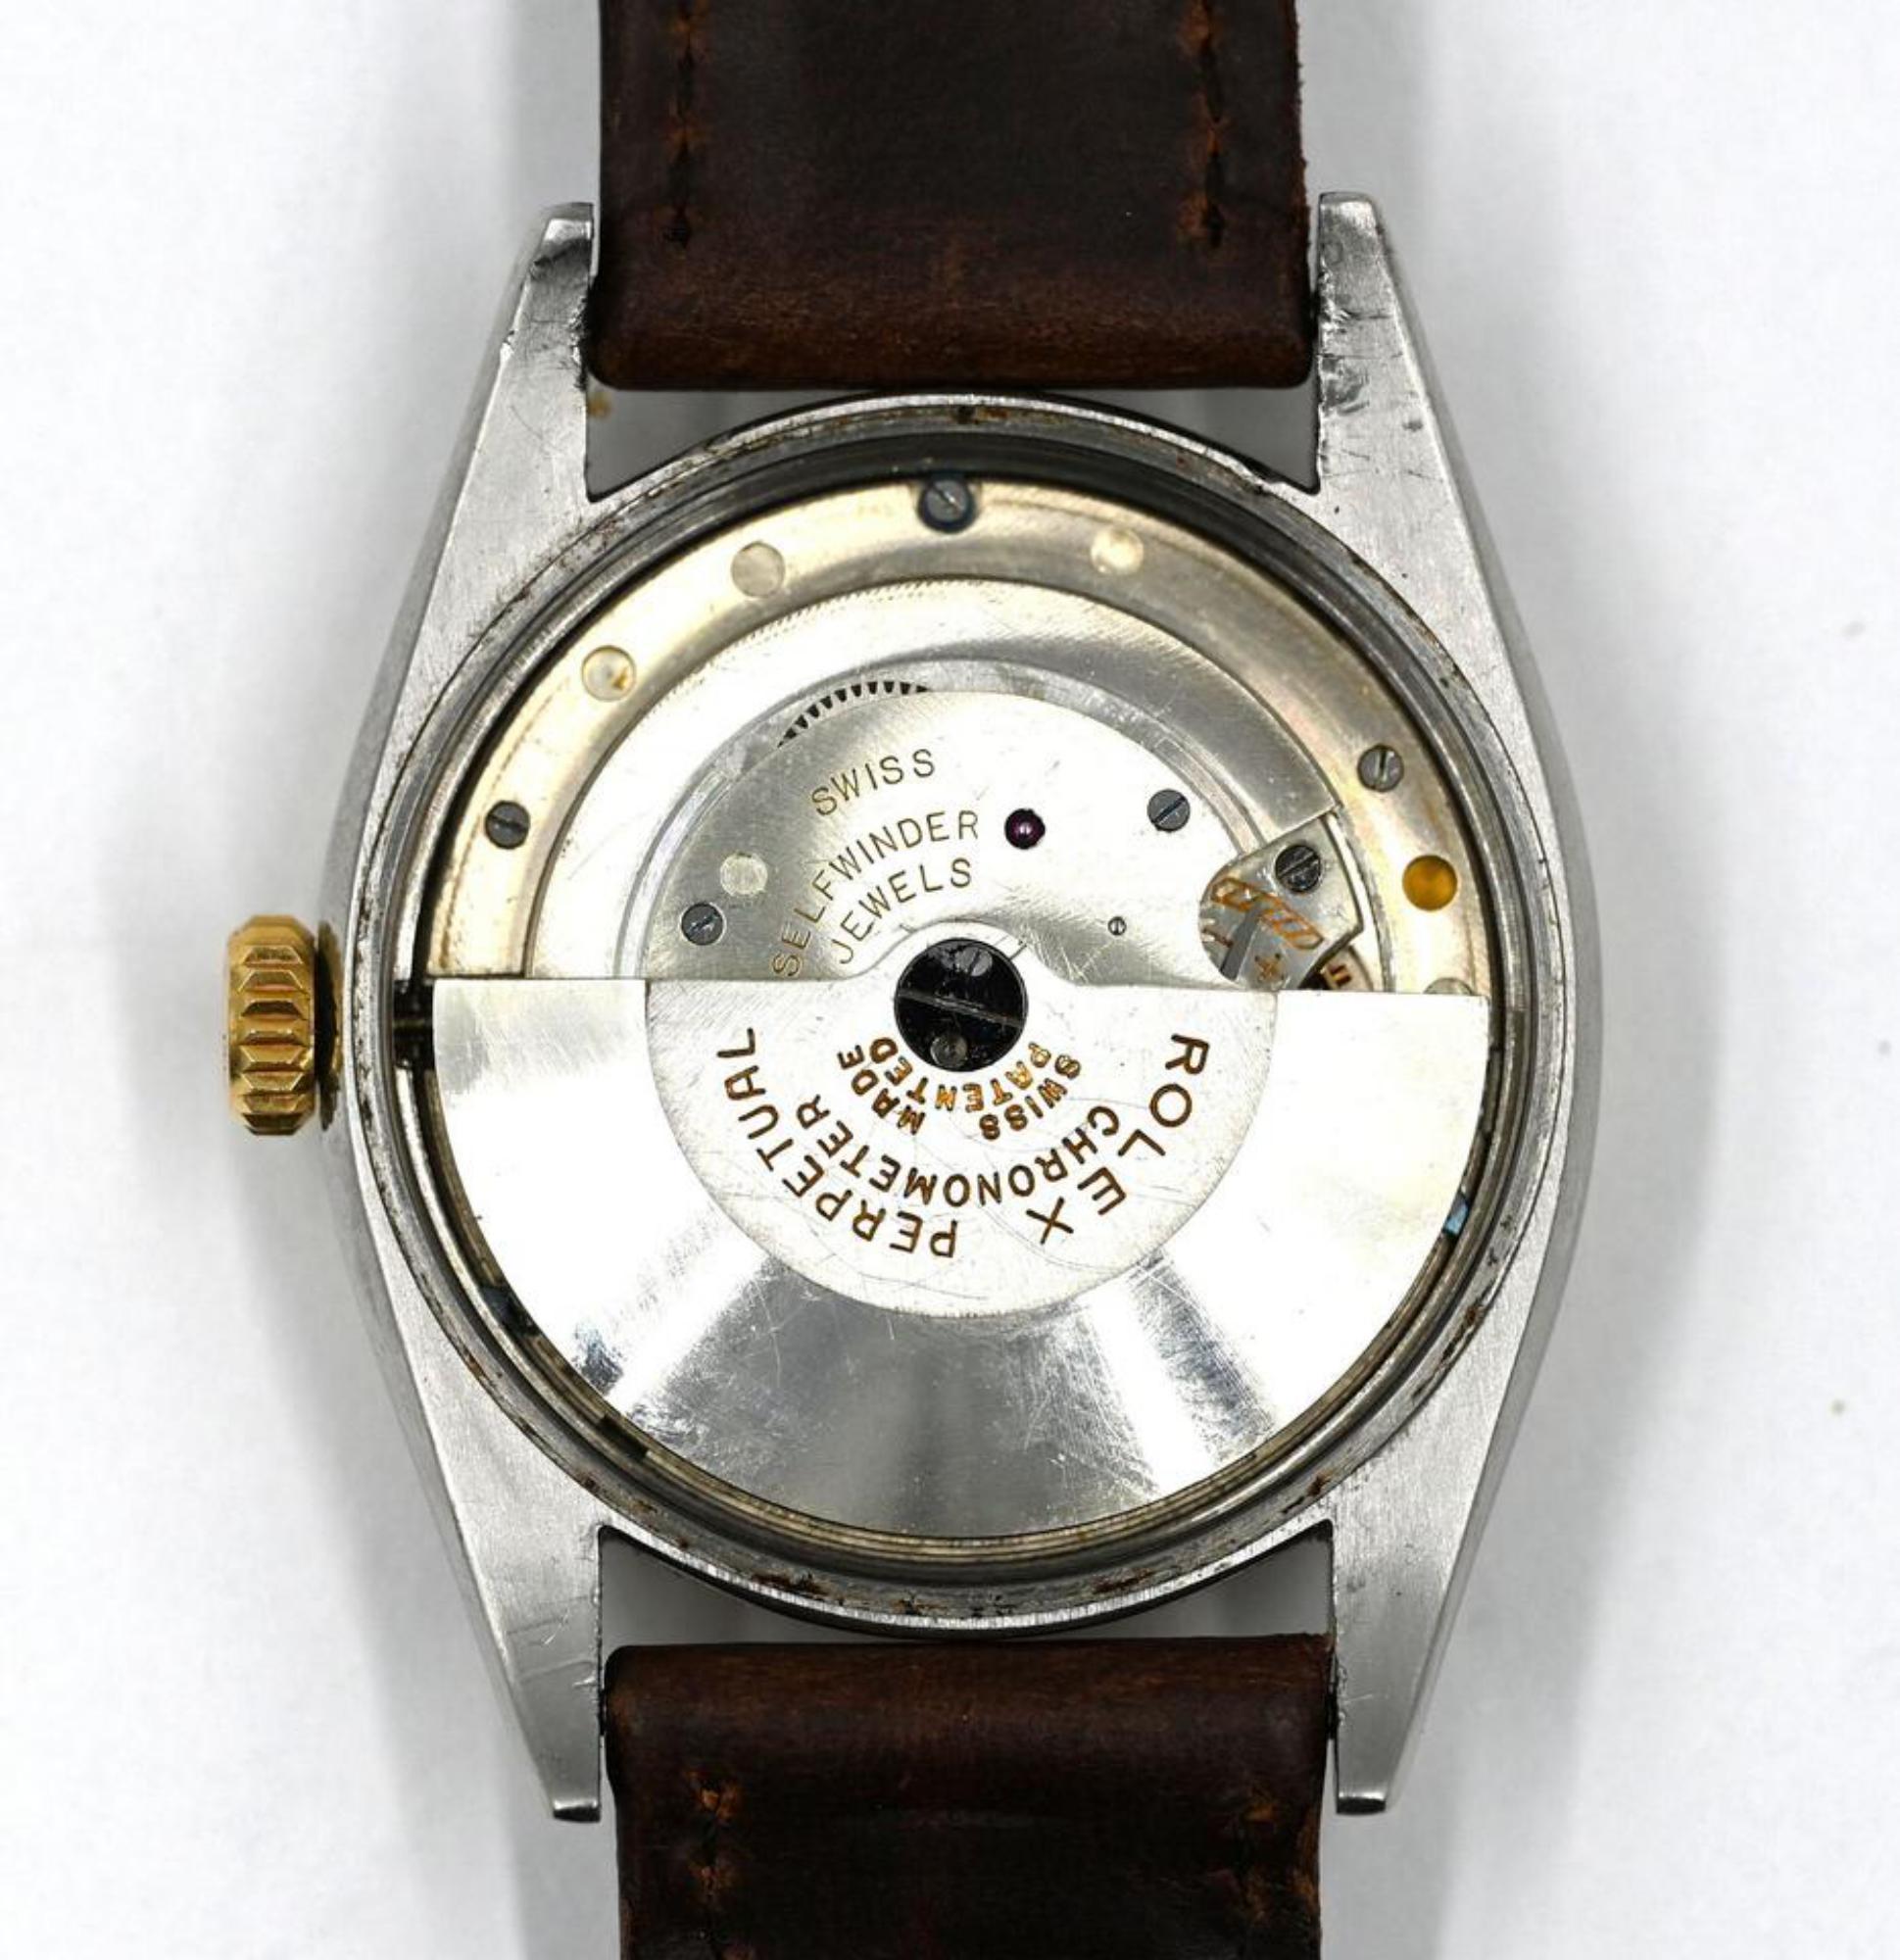 Rolex c1953 14k Oyster Perpetual Datejust Ref 6105 Bubble Back Uhr 16r222s im Angebot 4